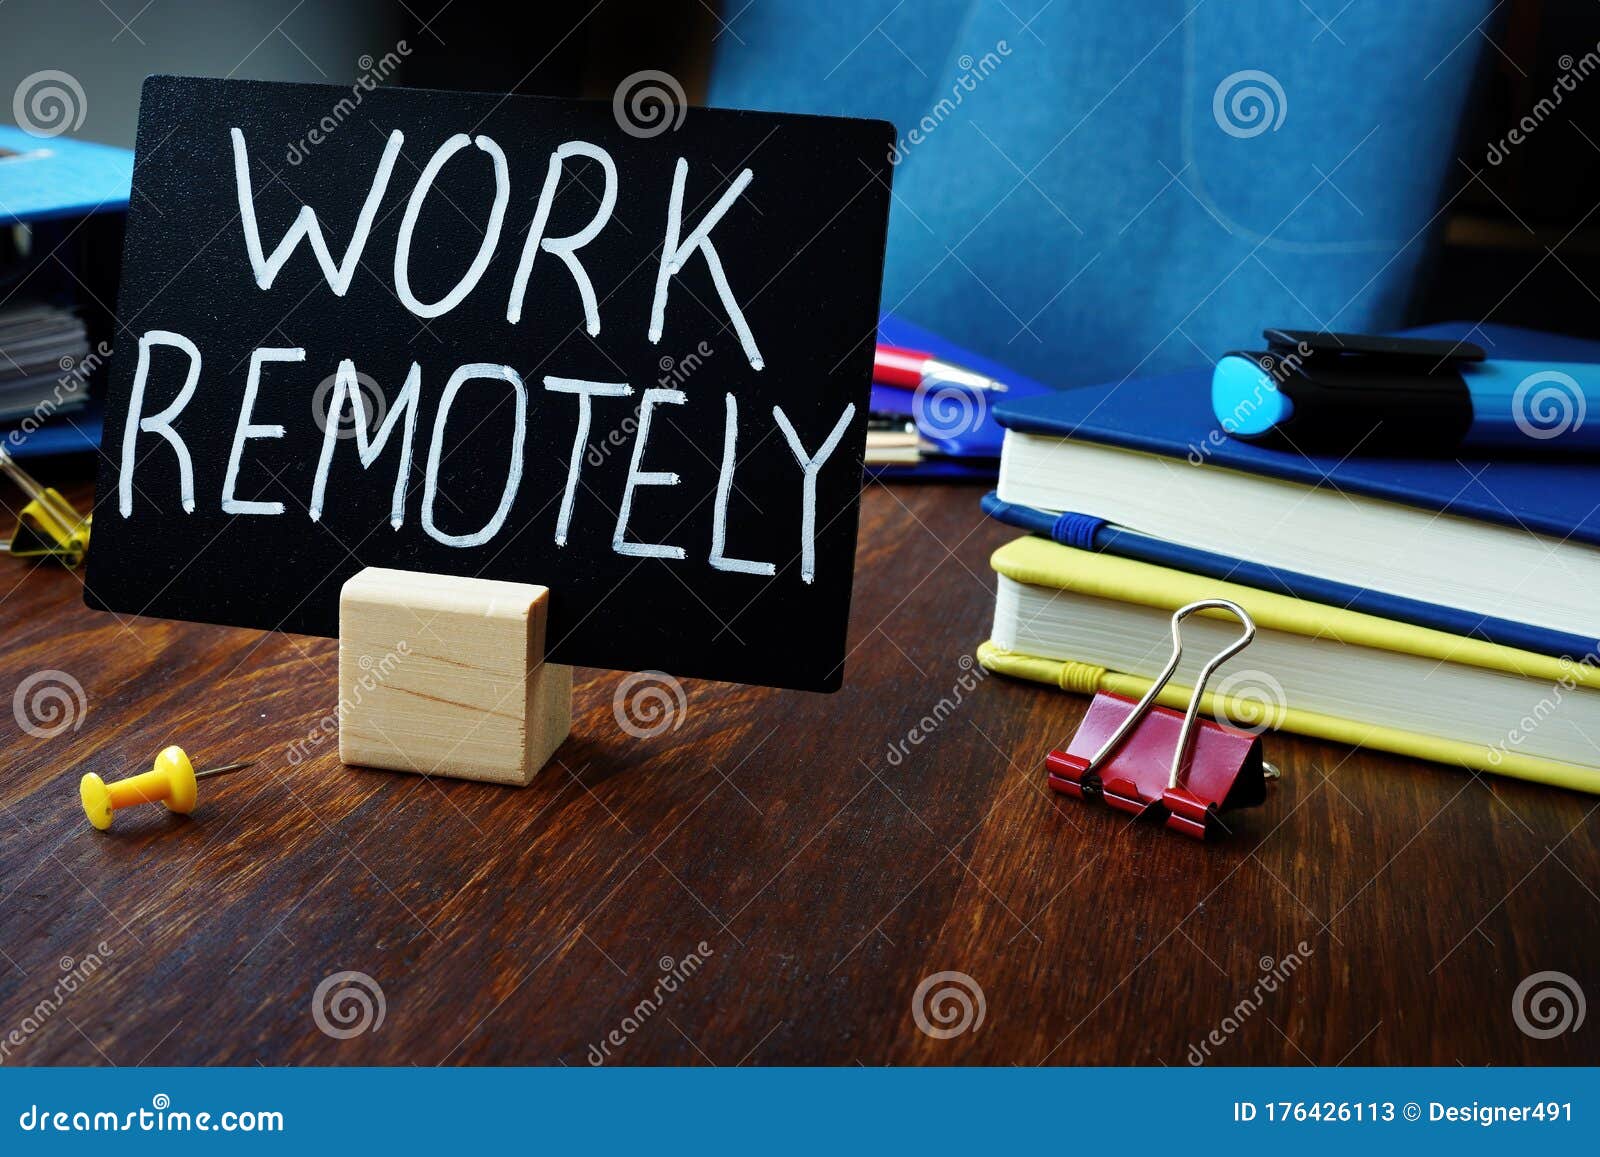 work remotely sign on the desk about remote job